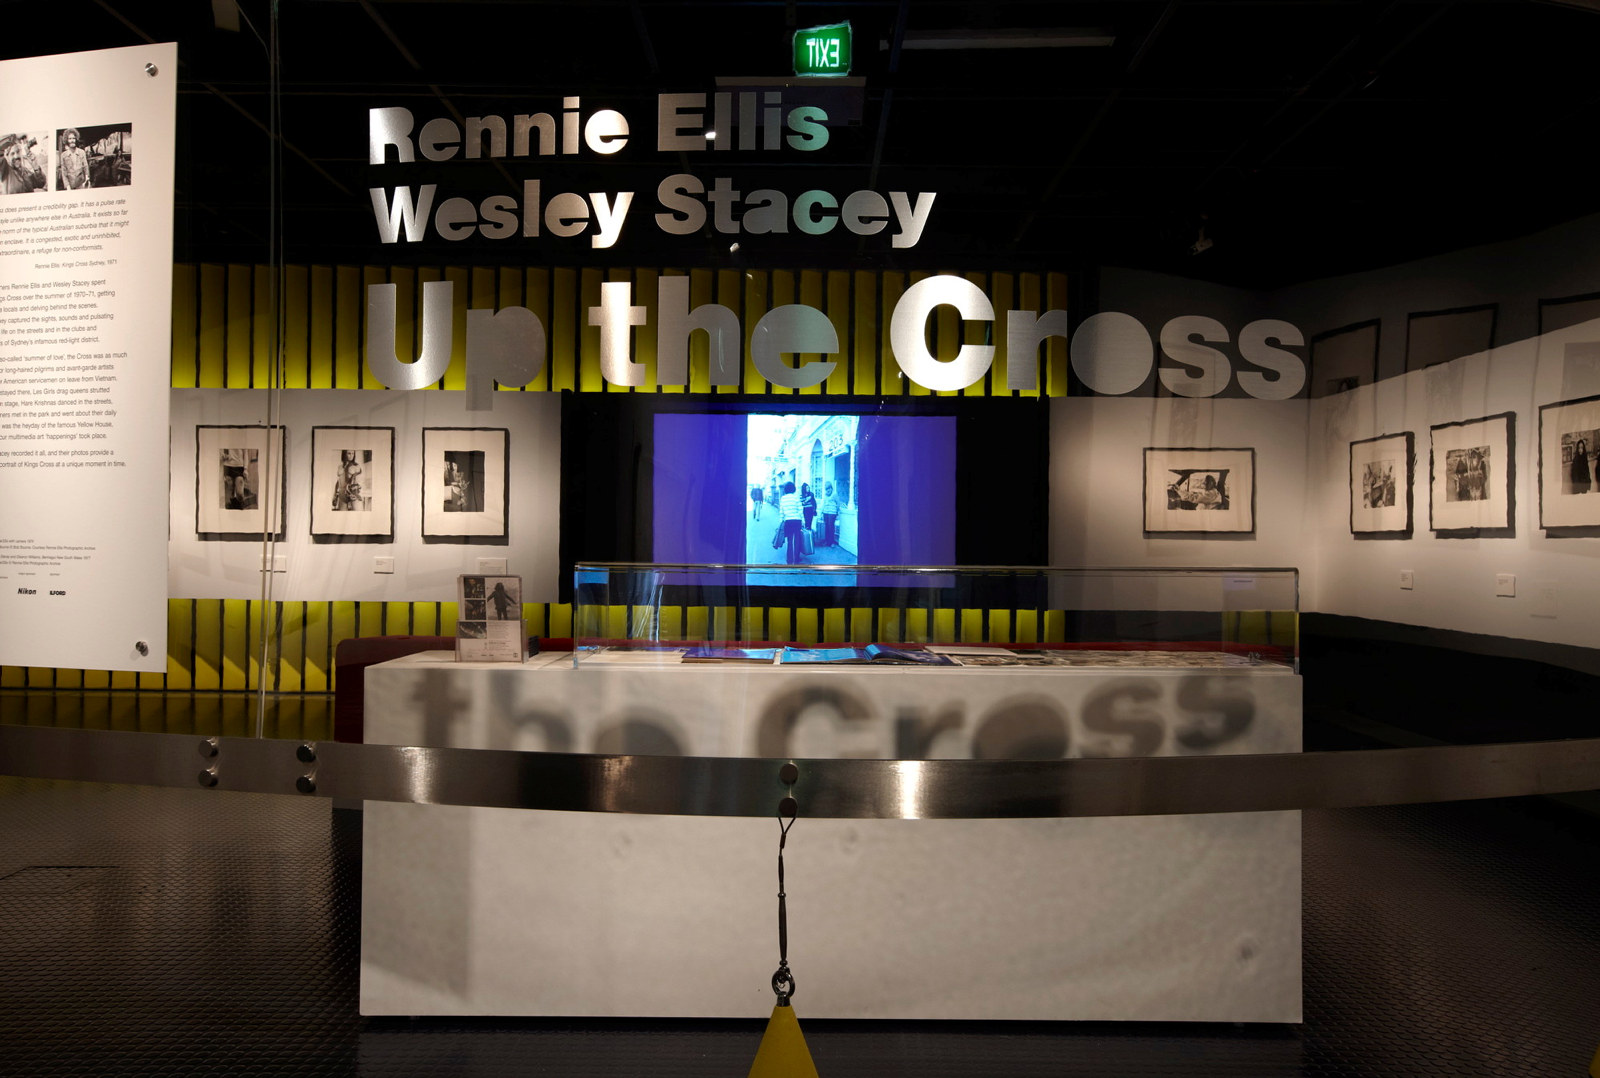 Up the Cross: Rennie Ellis & Wesley Stacey exhibition installation view